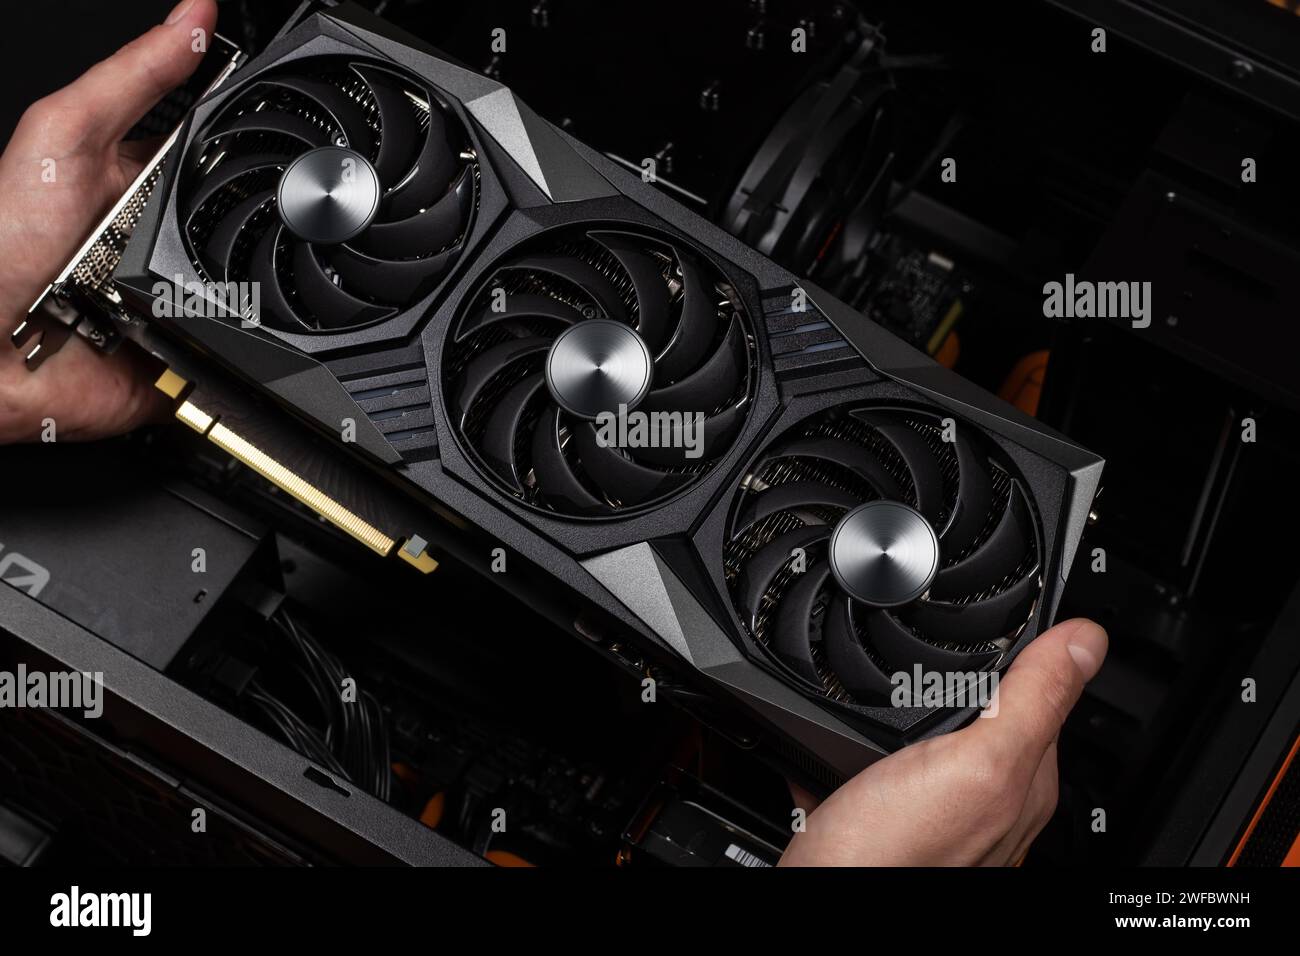 Installing video card in an open case of personal computer. Graphics adapter or graphics card in the hand of a technician. PC assembly and upgrade. Stock Photo